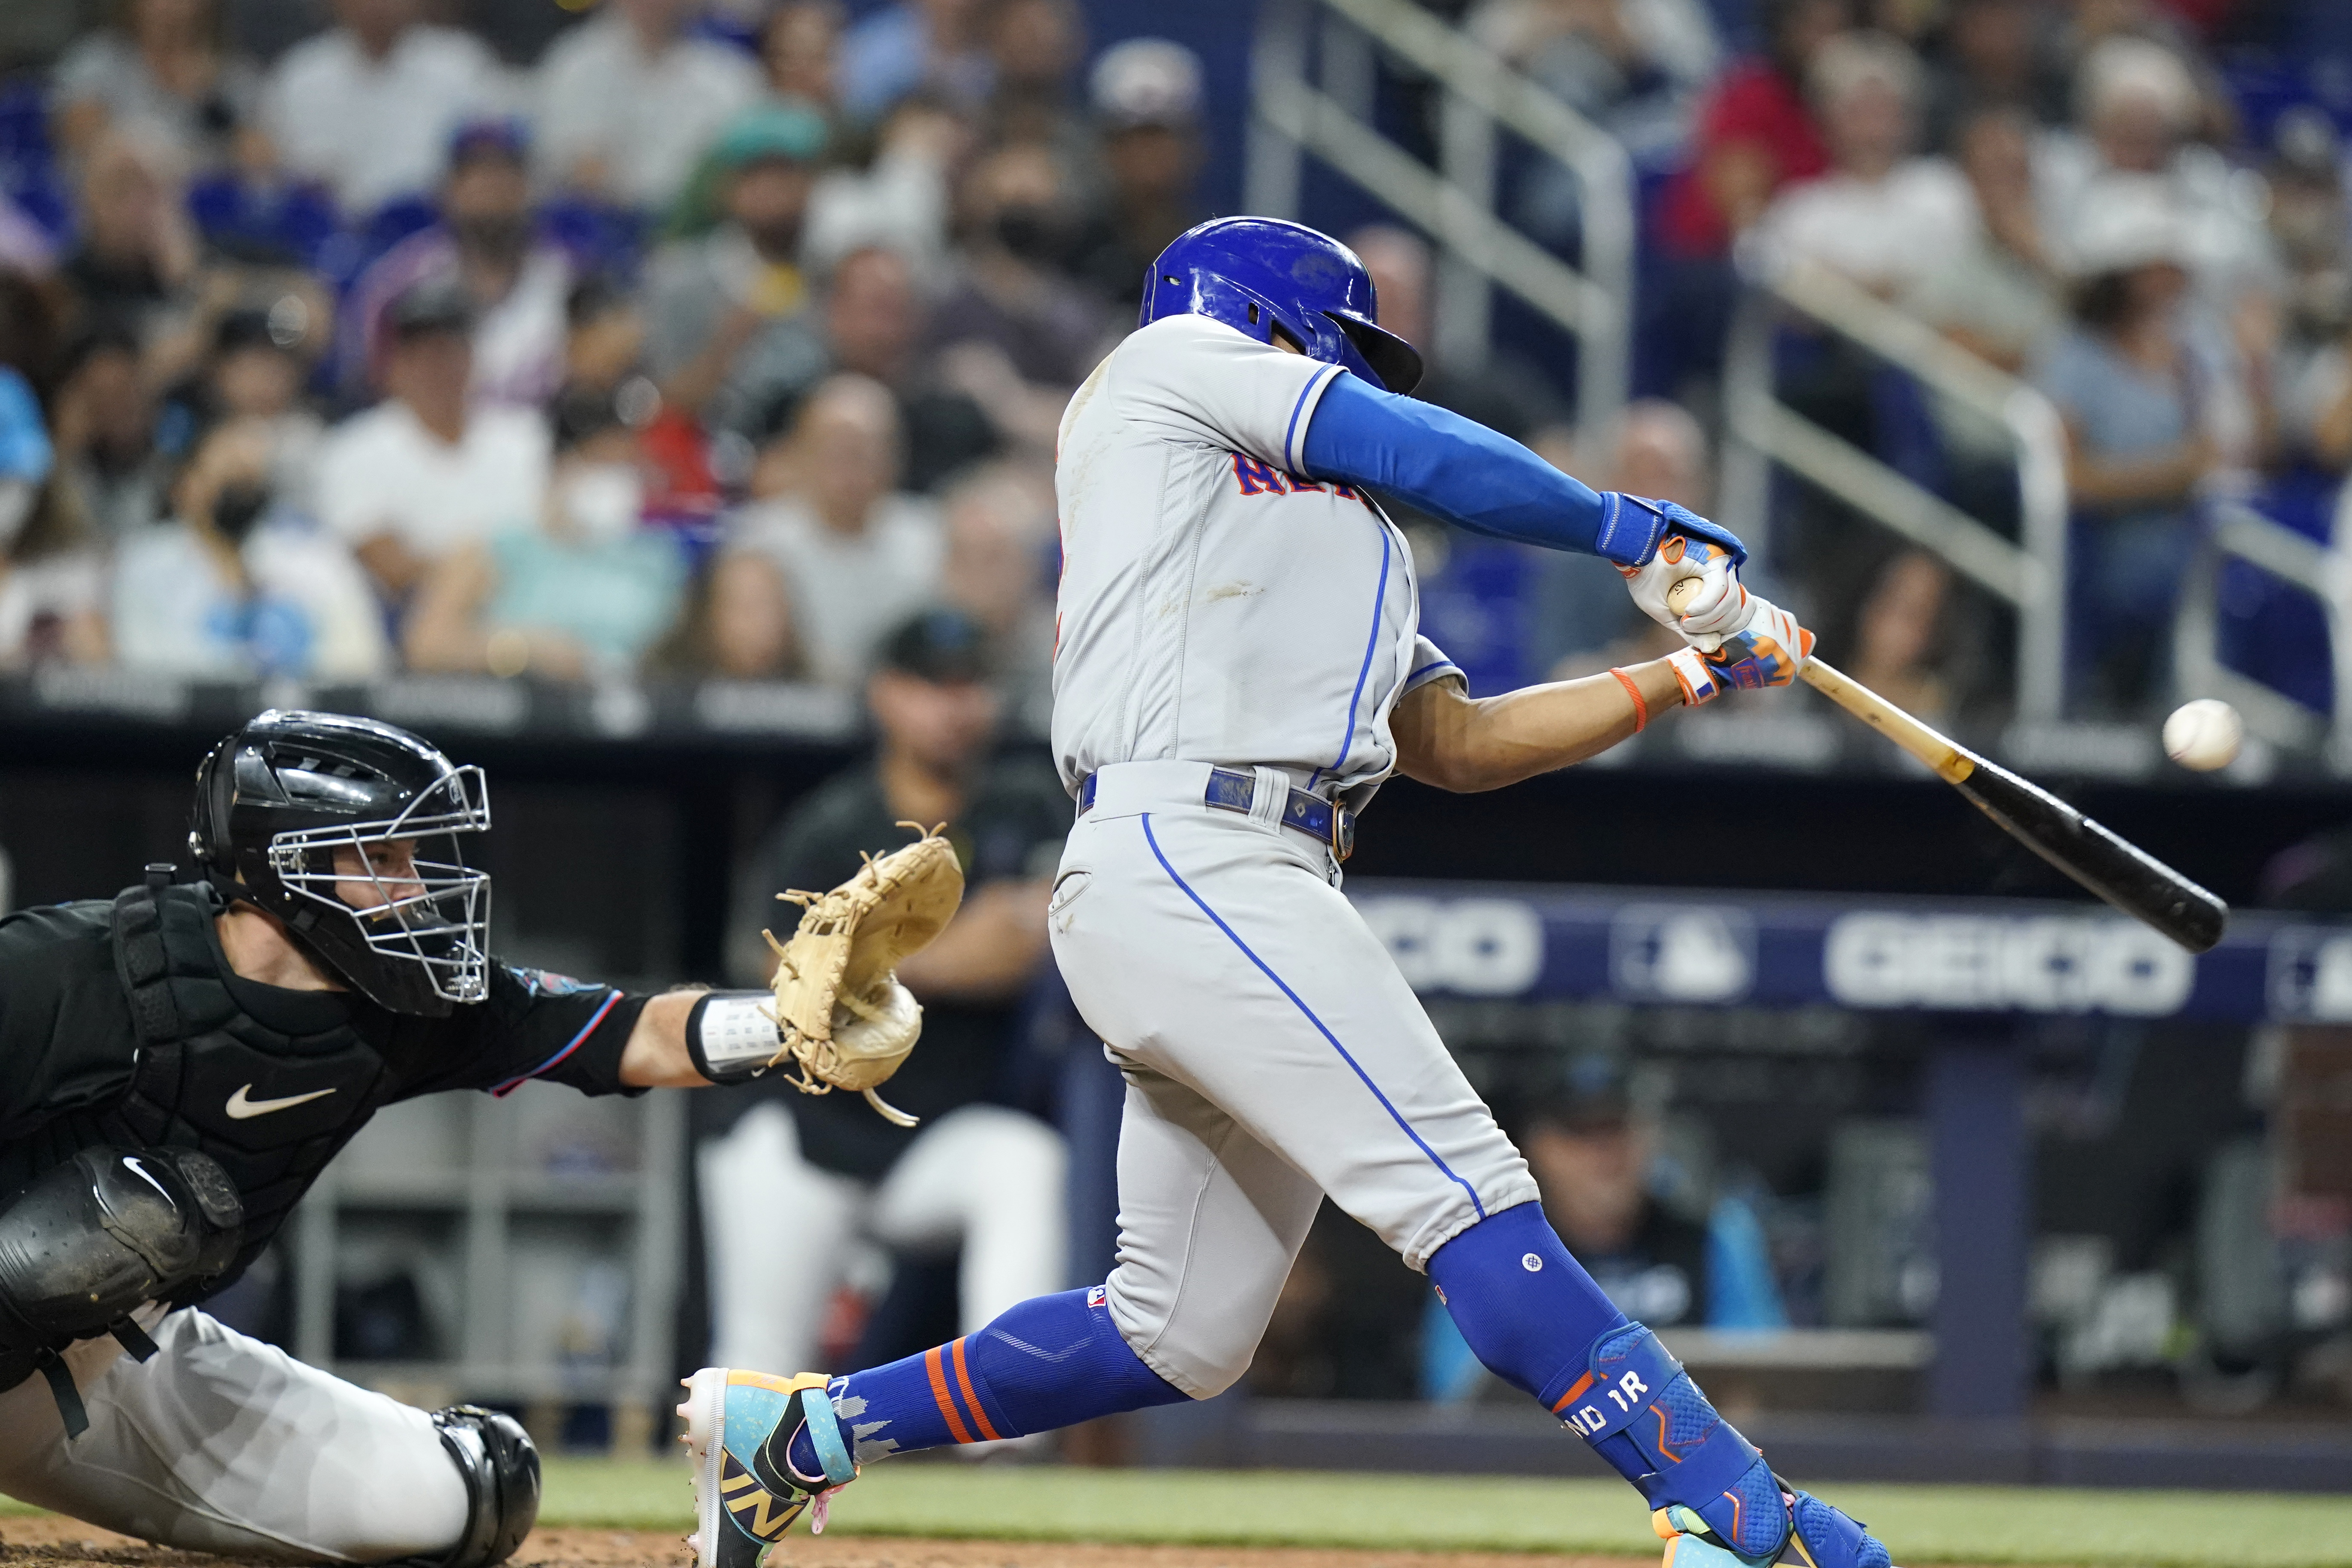 METS: Francisco has meltdown in loss to Marlins